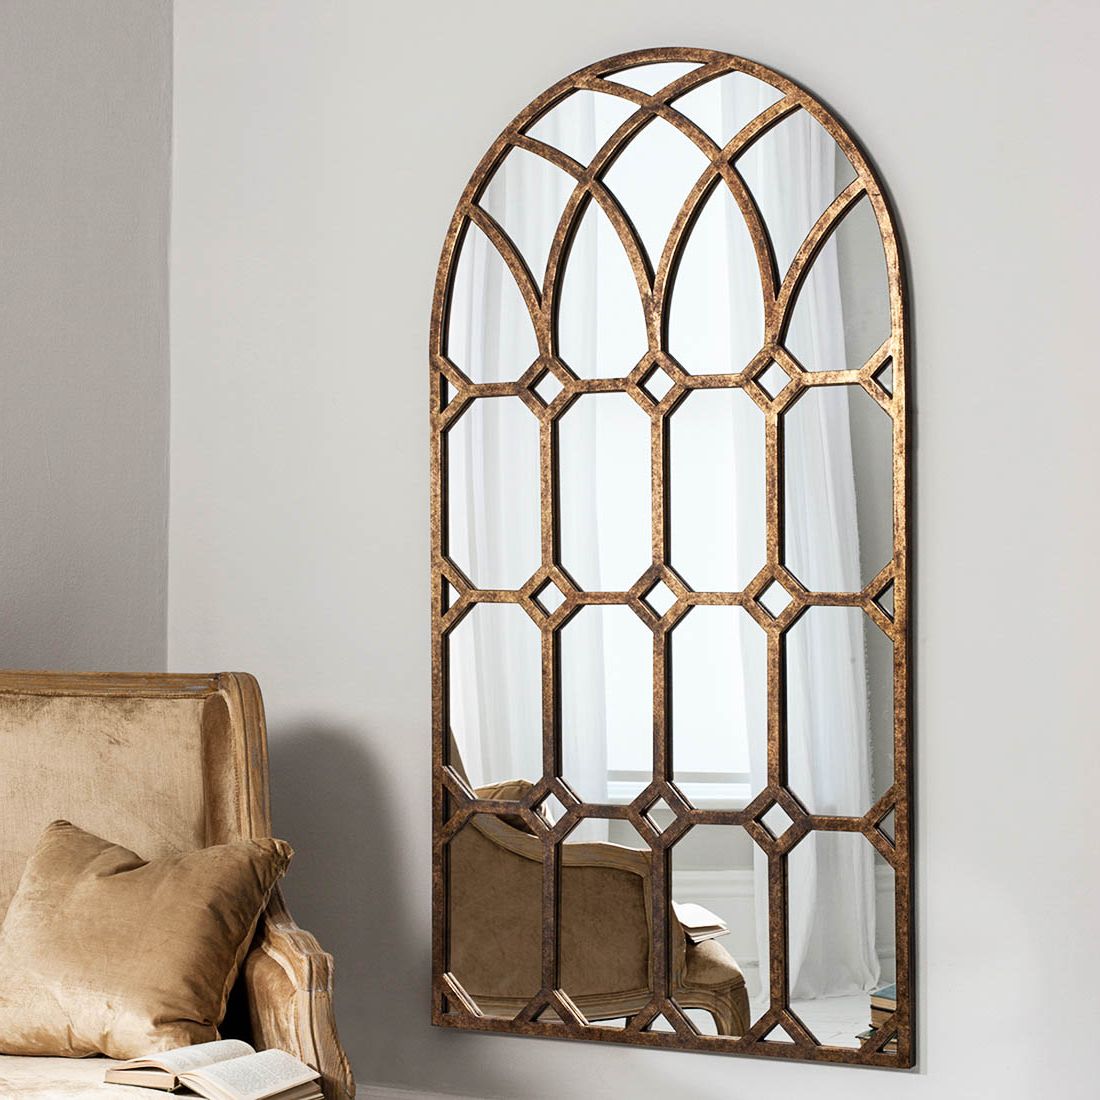 Bronze Gothic Arched Window Wall Mirror Inside Favorite Arched Wall Mirrors (View 12 of 20)